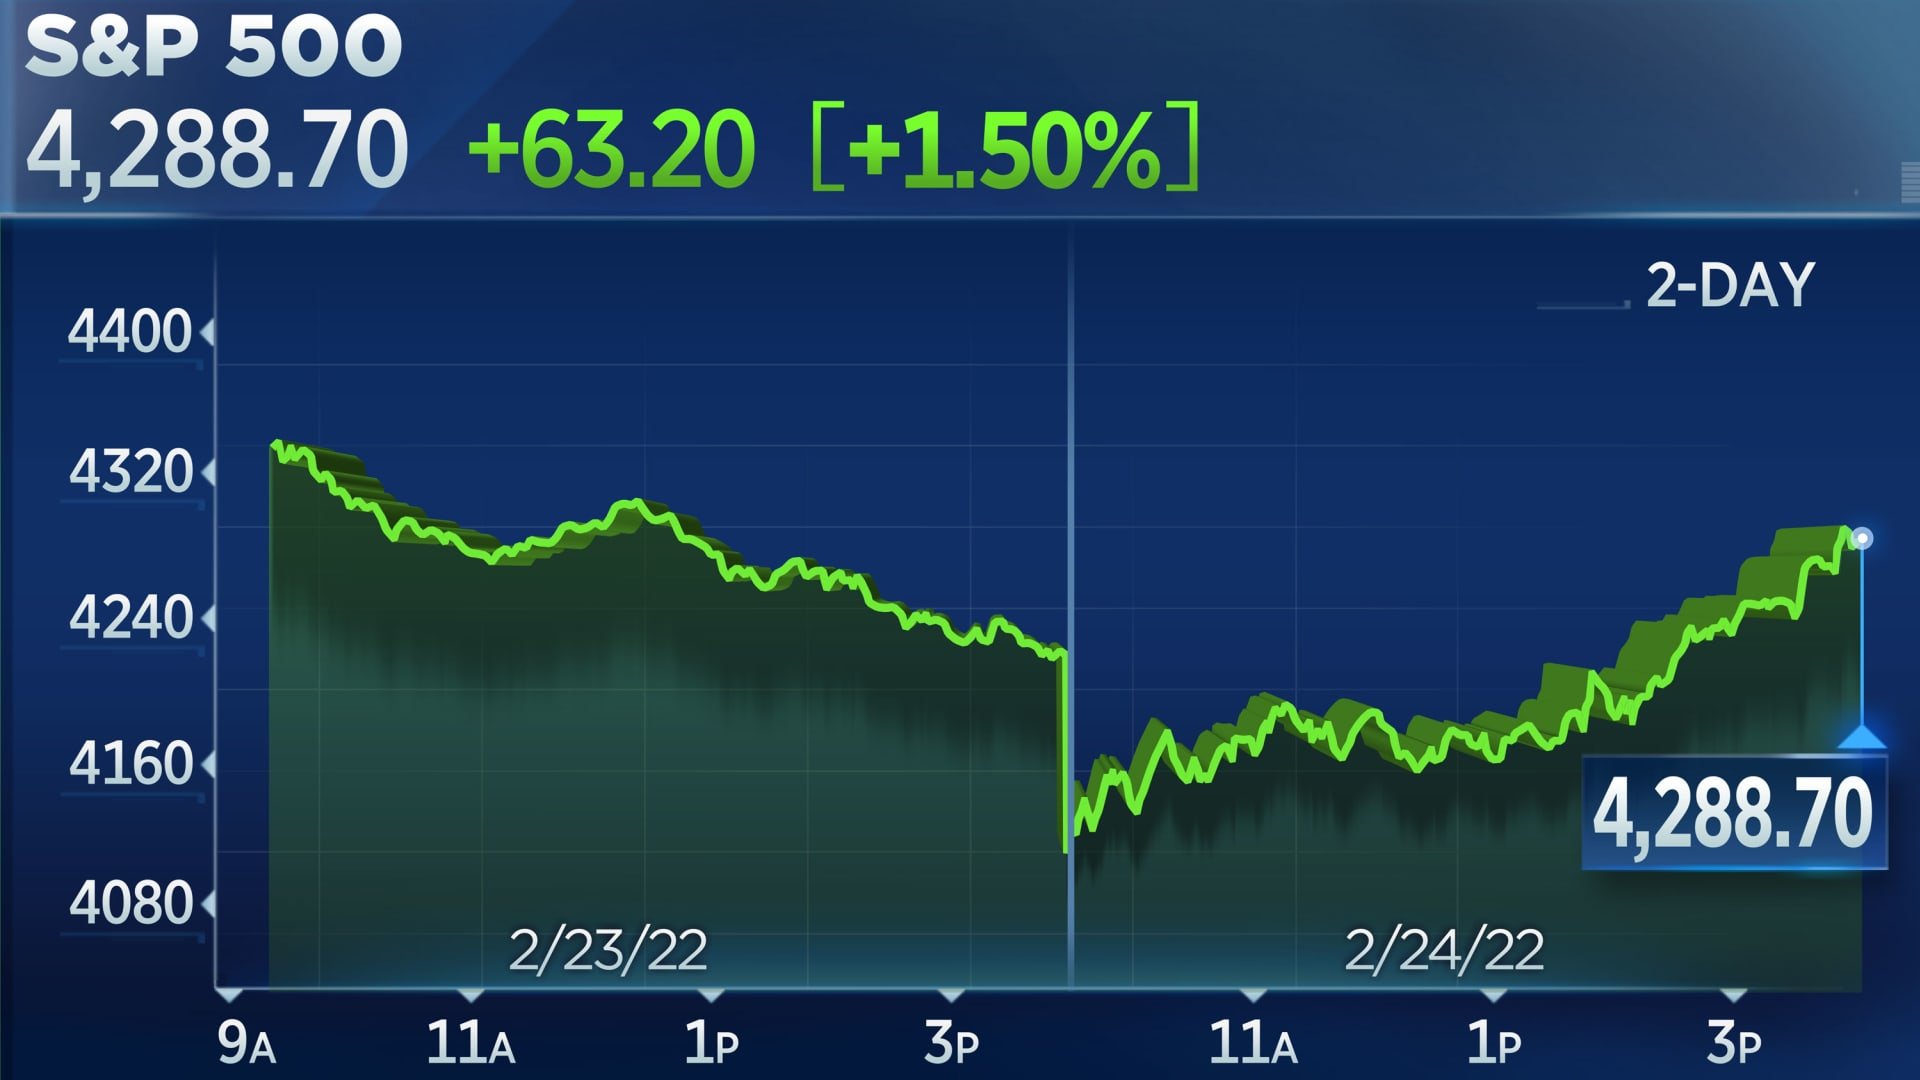 S&P 500 closes 1.5% higher after sharp reversal, as traders shake off Russia's invasion of Ukraine